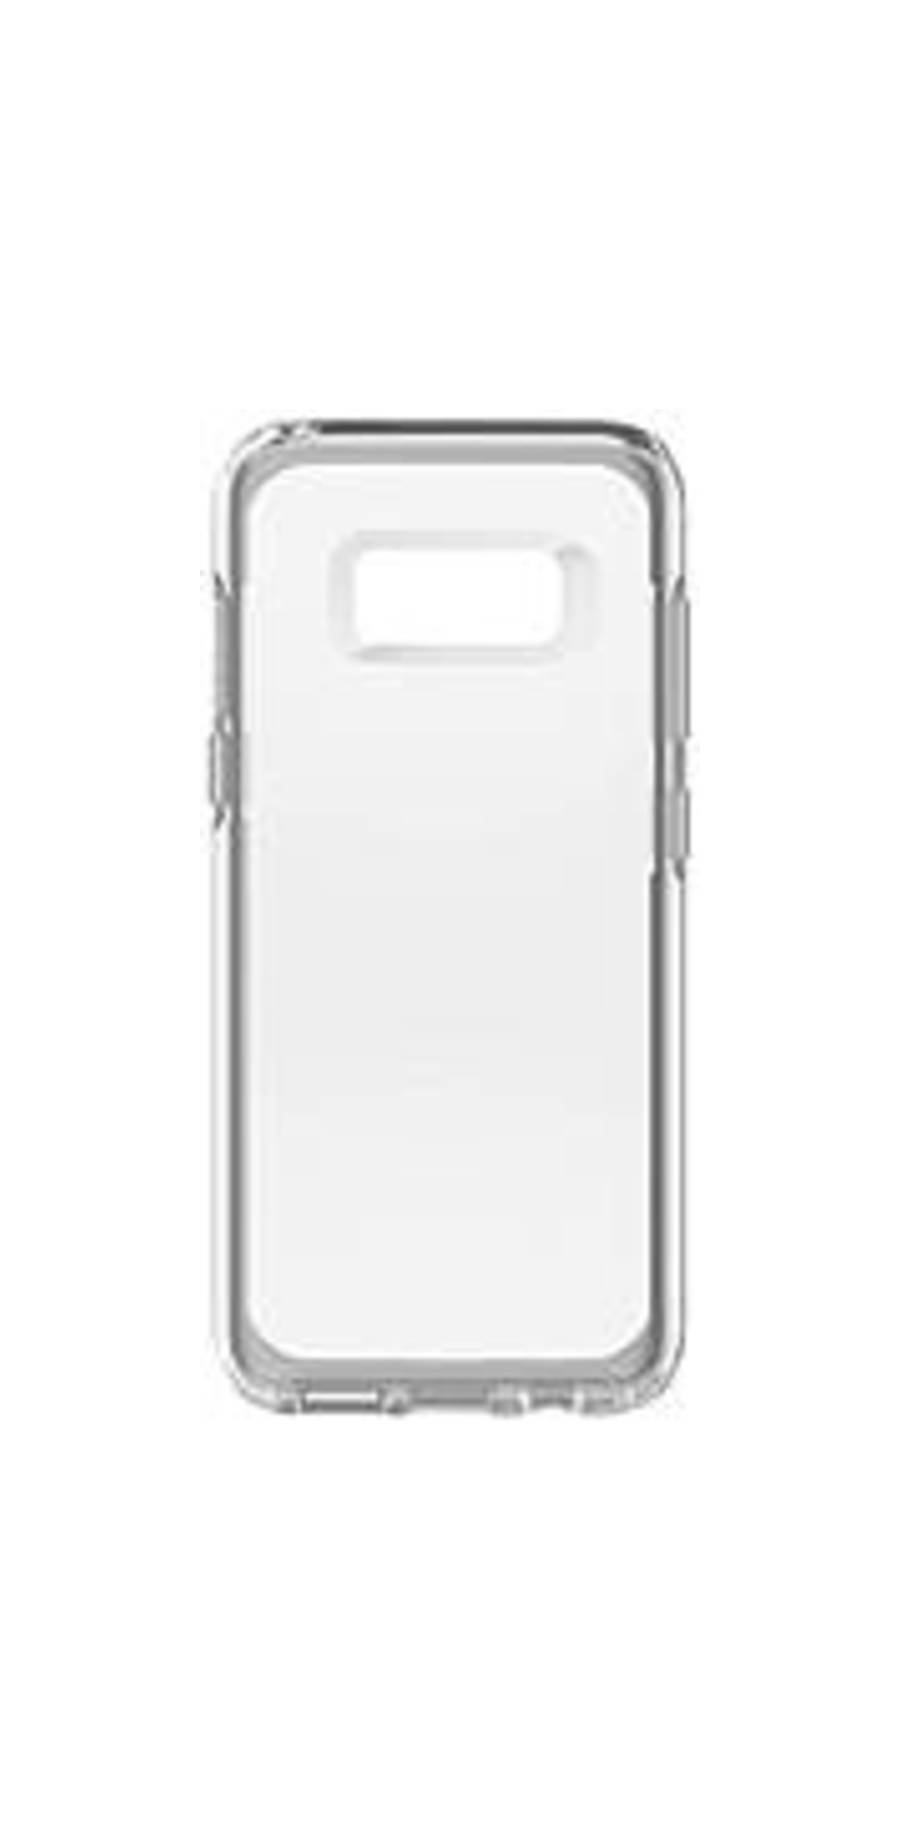 OtterBox Symmetry 660543414513 Hard Case for Samsung Galaxy S8 Smartphone - Clear